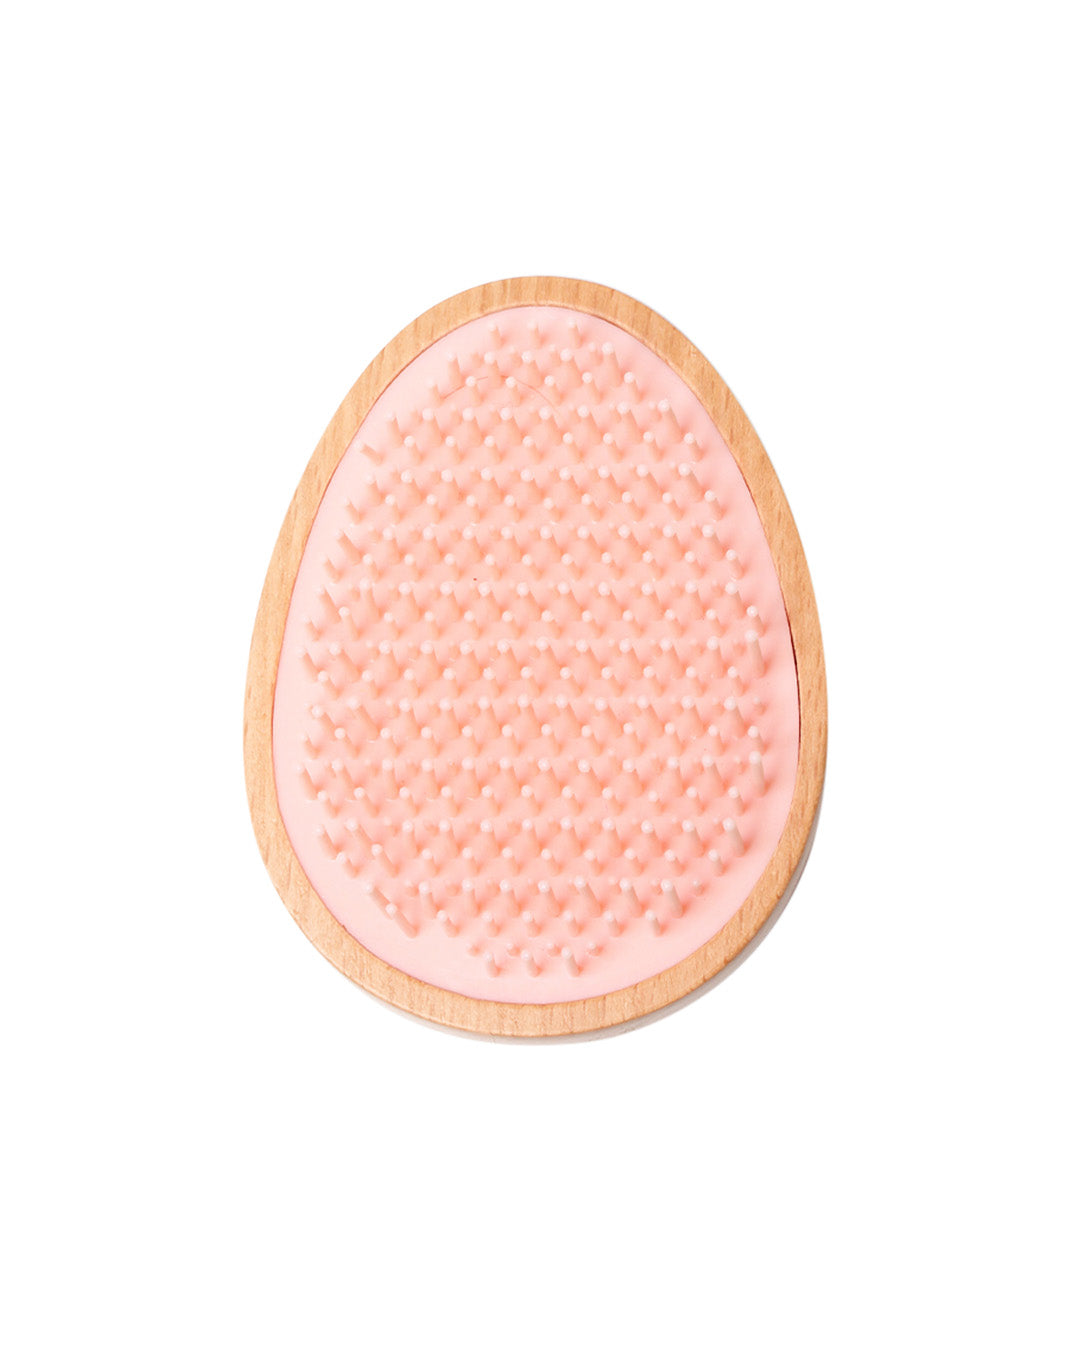 BANDED Women's Hair Accessories Eco Beech Wood Egg Travel Brush